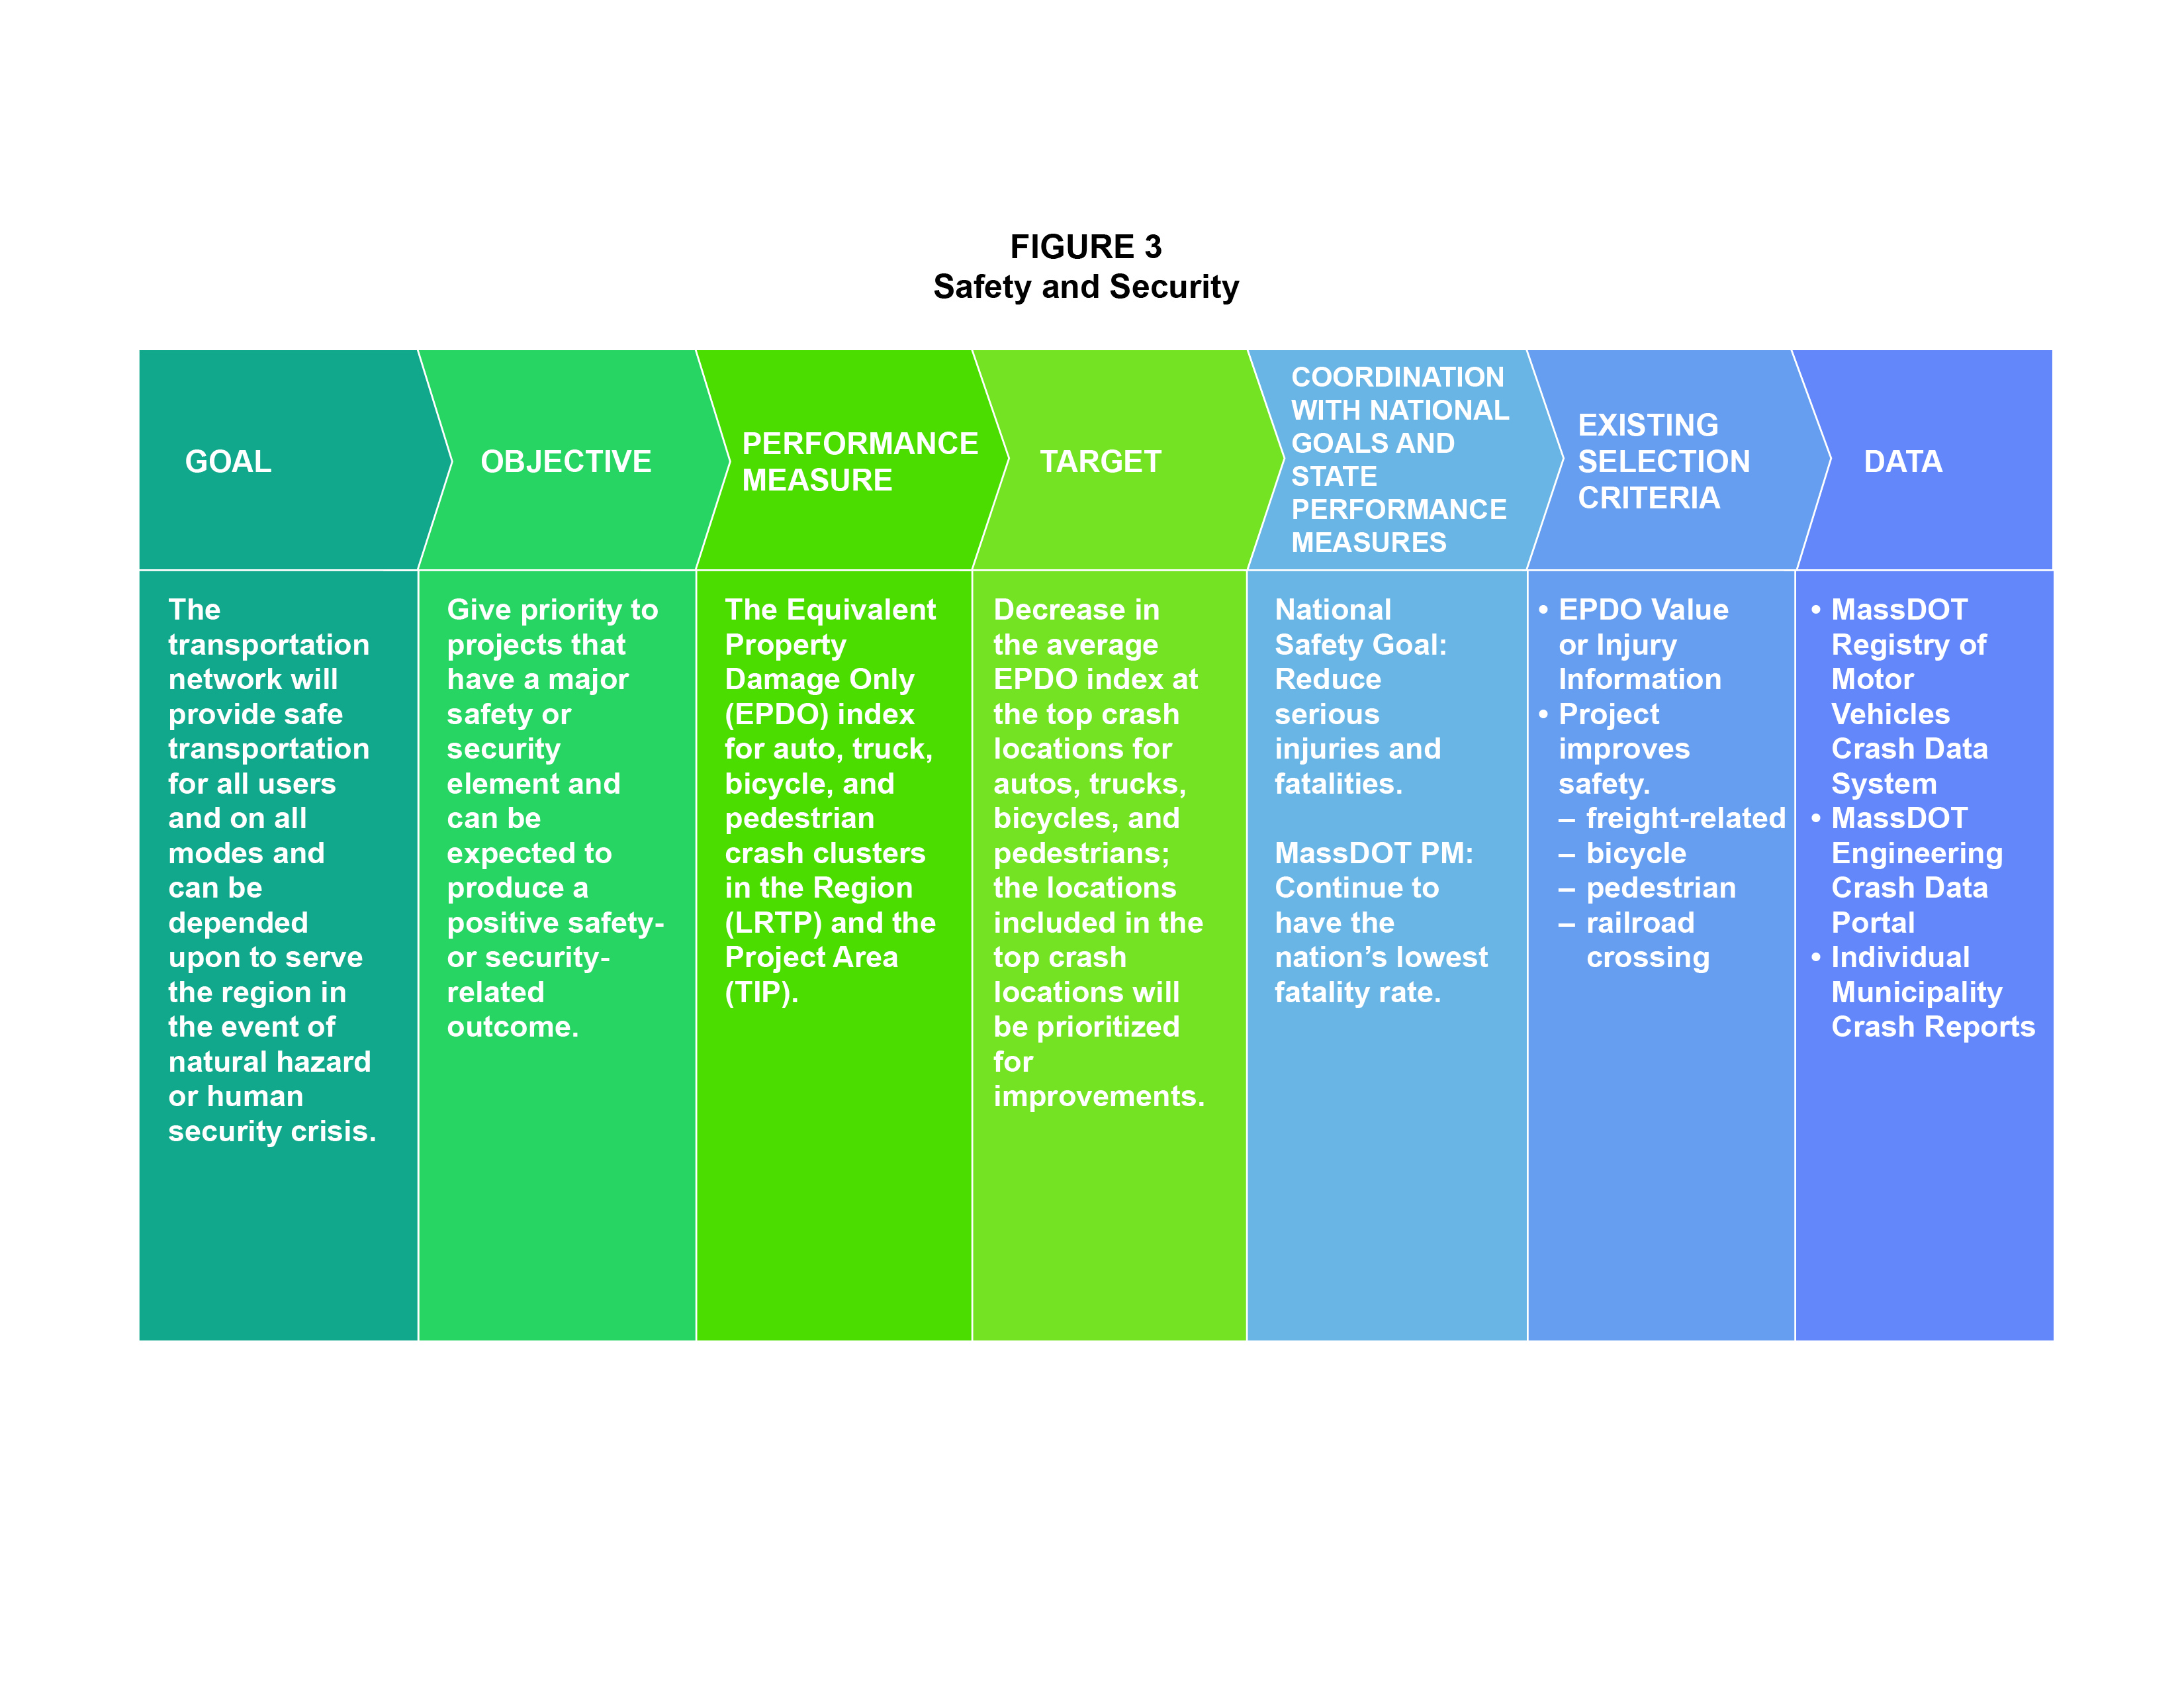 FIGURE 3. Safety and Security
This graphic presents matrix that contains seven columns with the headings: Goal, Objective, Performance Measure, Target, Coordination with National Goals and State Performance Measures, Existing Selection Criteria, and Data. Beneath the headings is text that cites how each of these topics relates to the goal of Safety and Security.